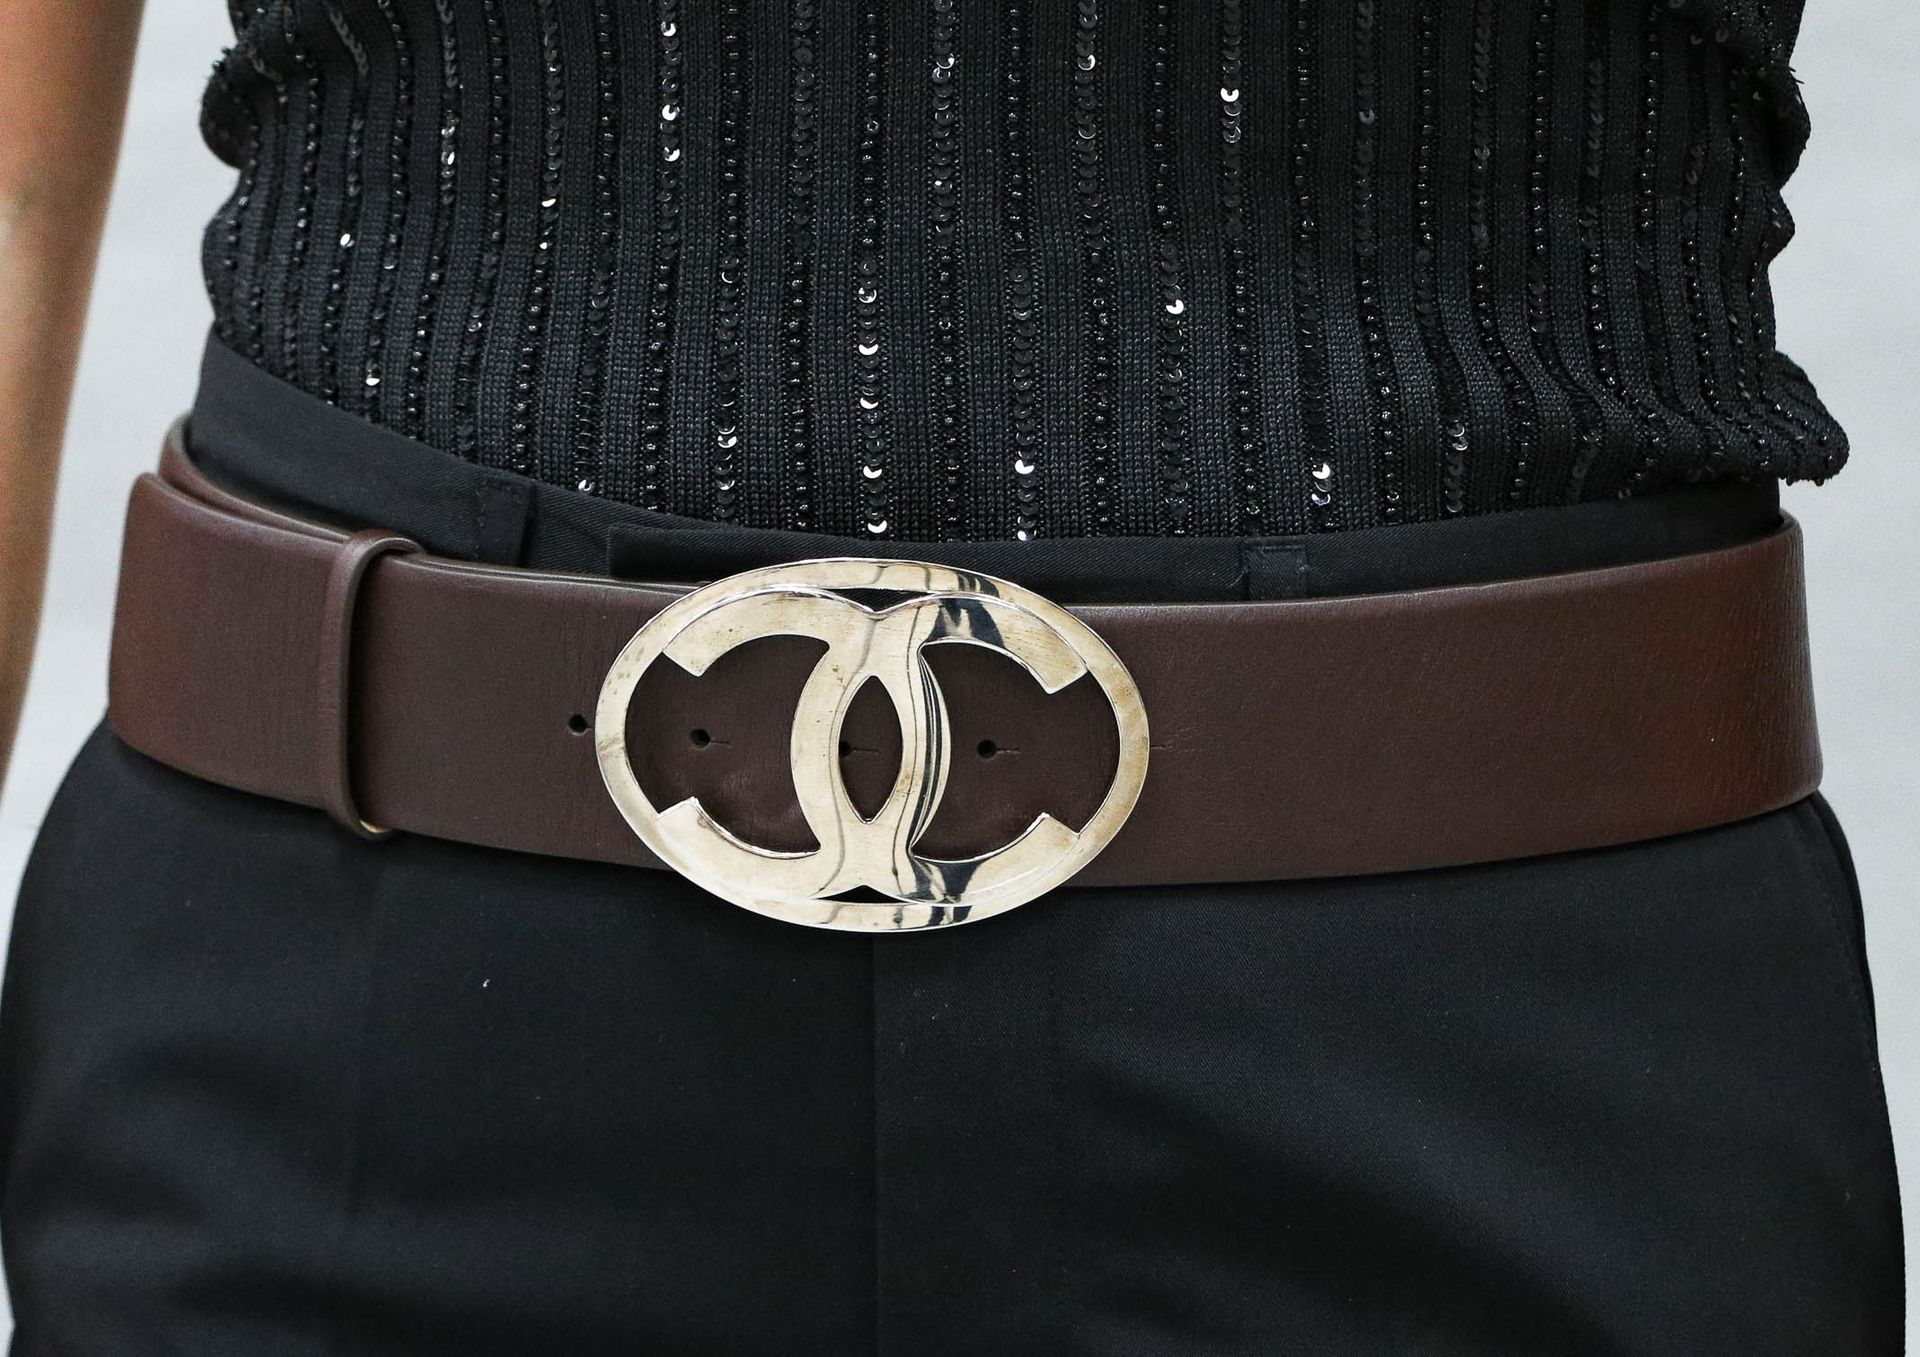 CHANEL - Circa 2000 - Chocolate leather belt - Buckle wi…